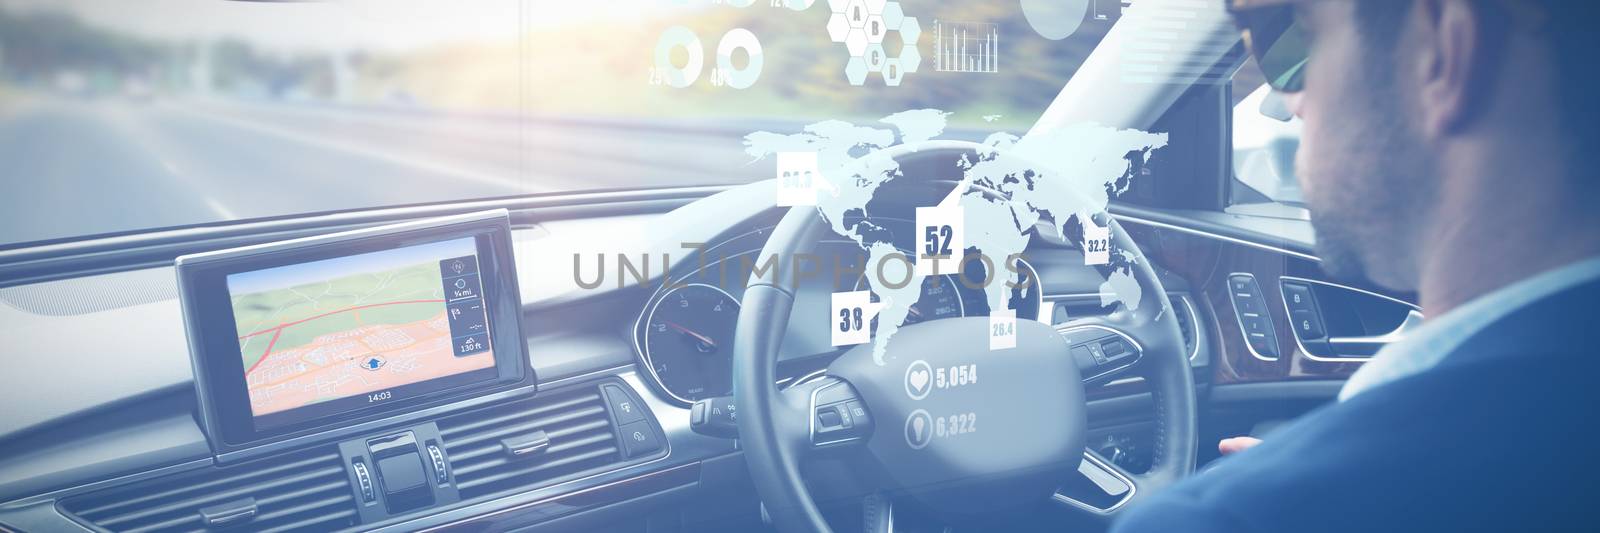 Global technology background against man behind the wheel wearing sunglasses